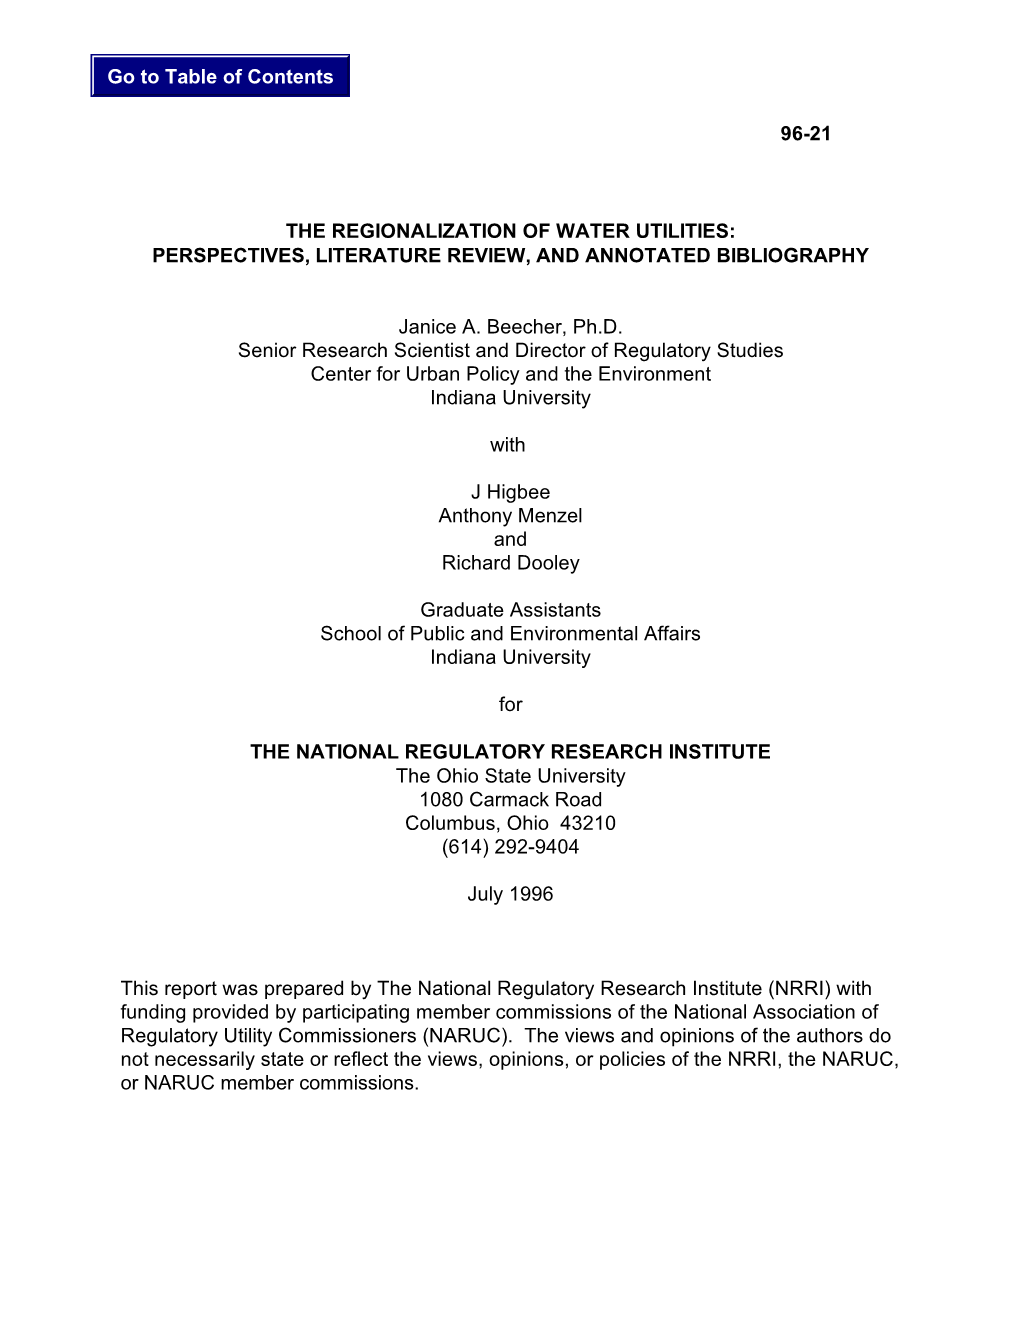 The Regionalization of Water Utilities: Perspectives, Literature Review, and Annotated Bibliography